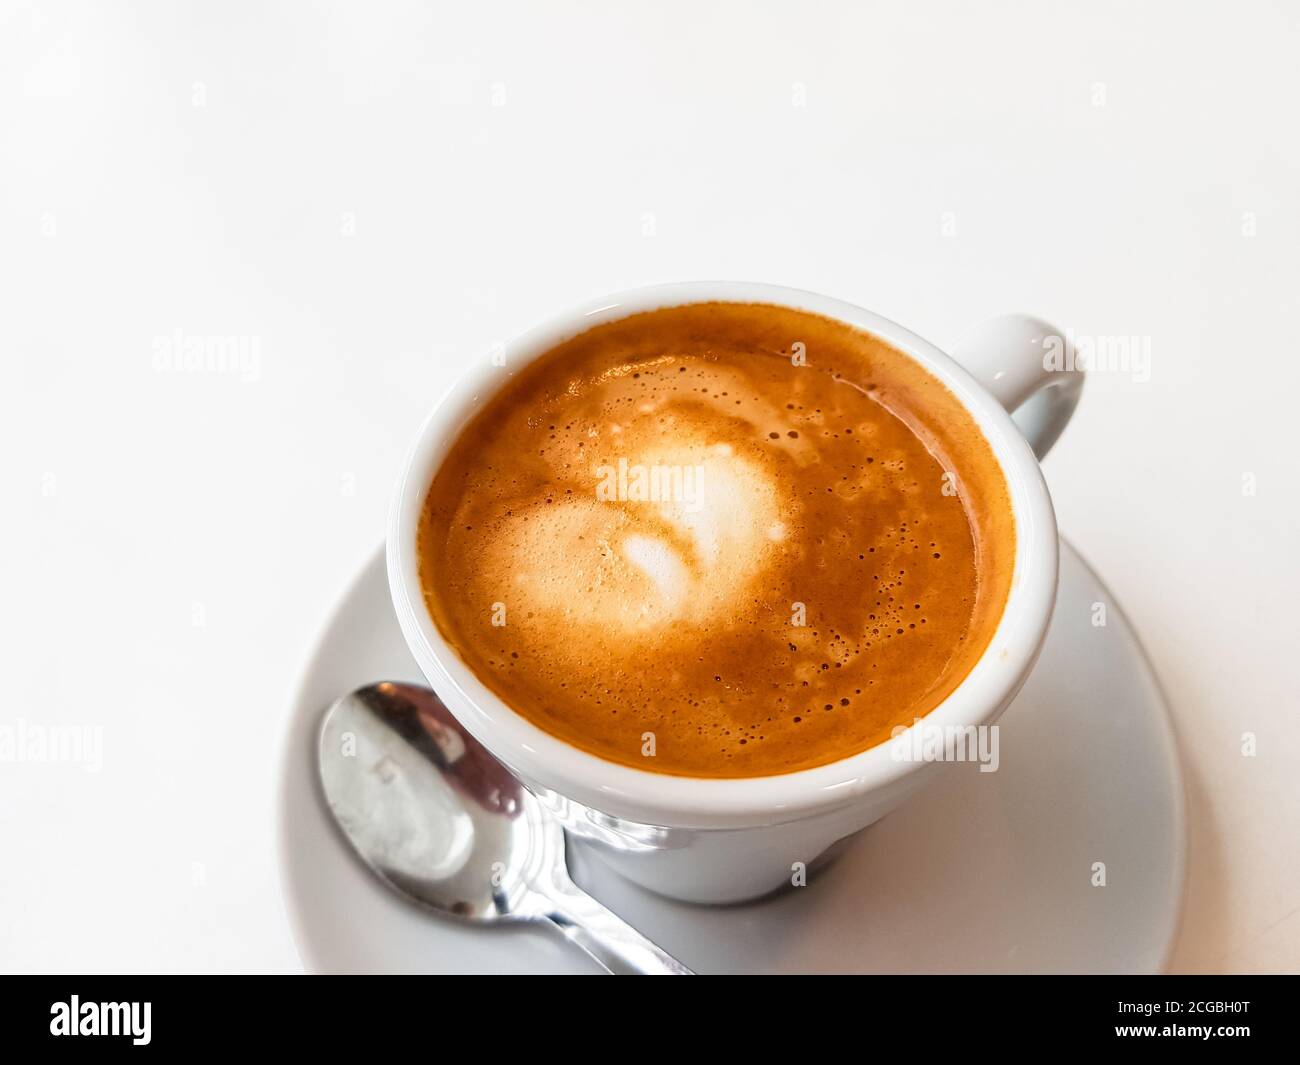 Cortado-Spanish coffee with milk in a small Cup. Stock Photo